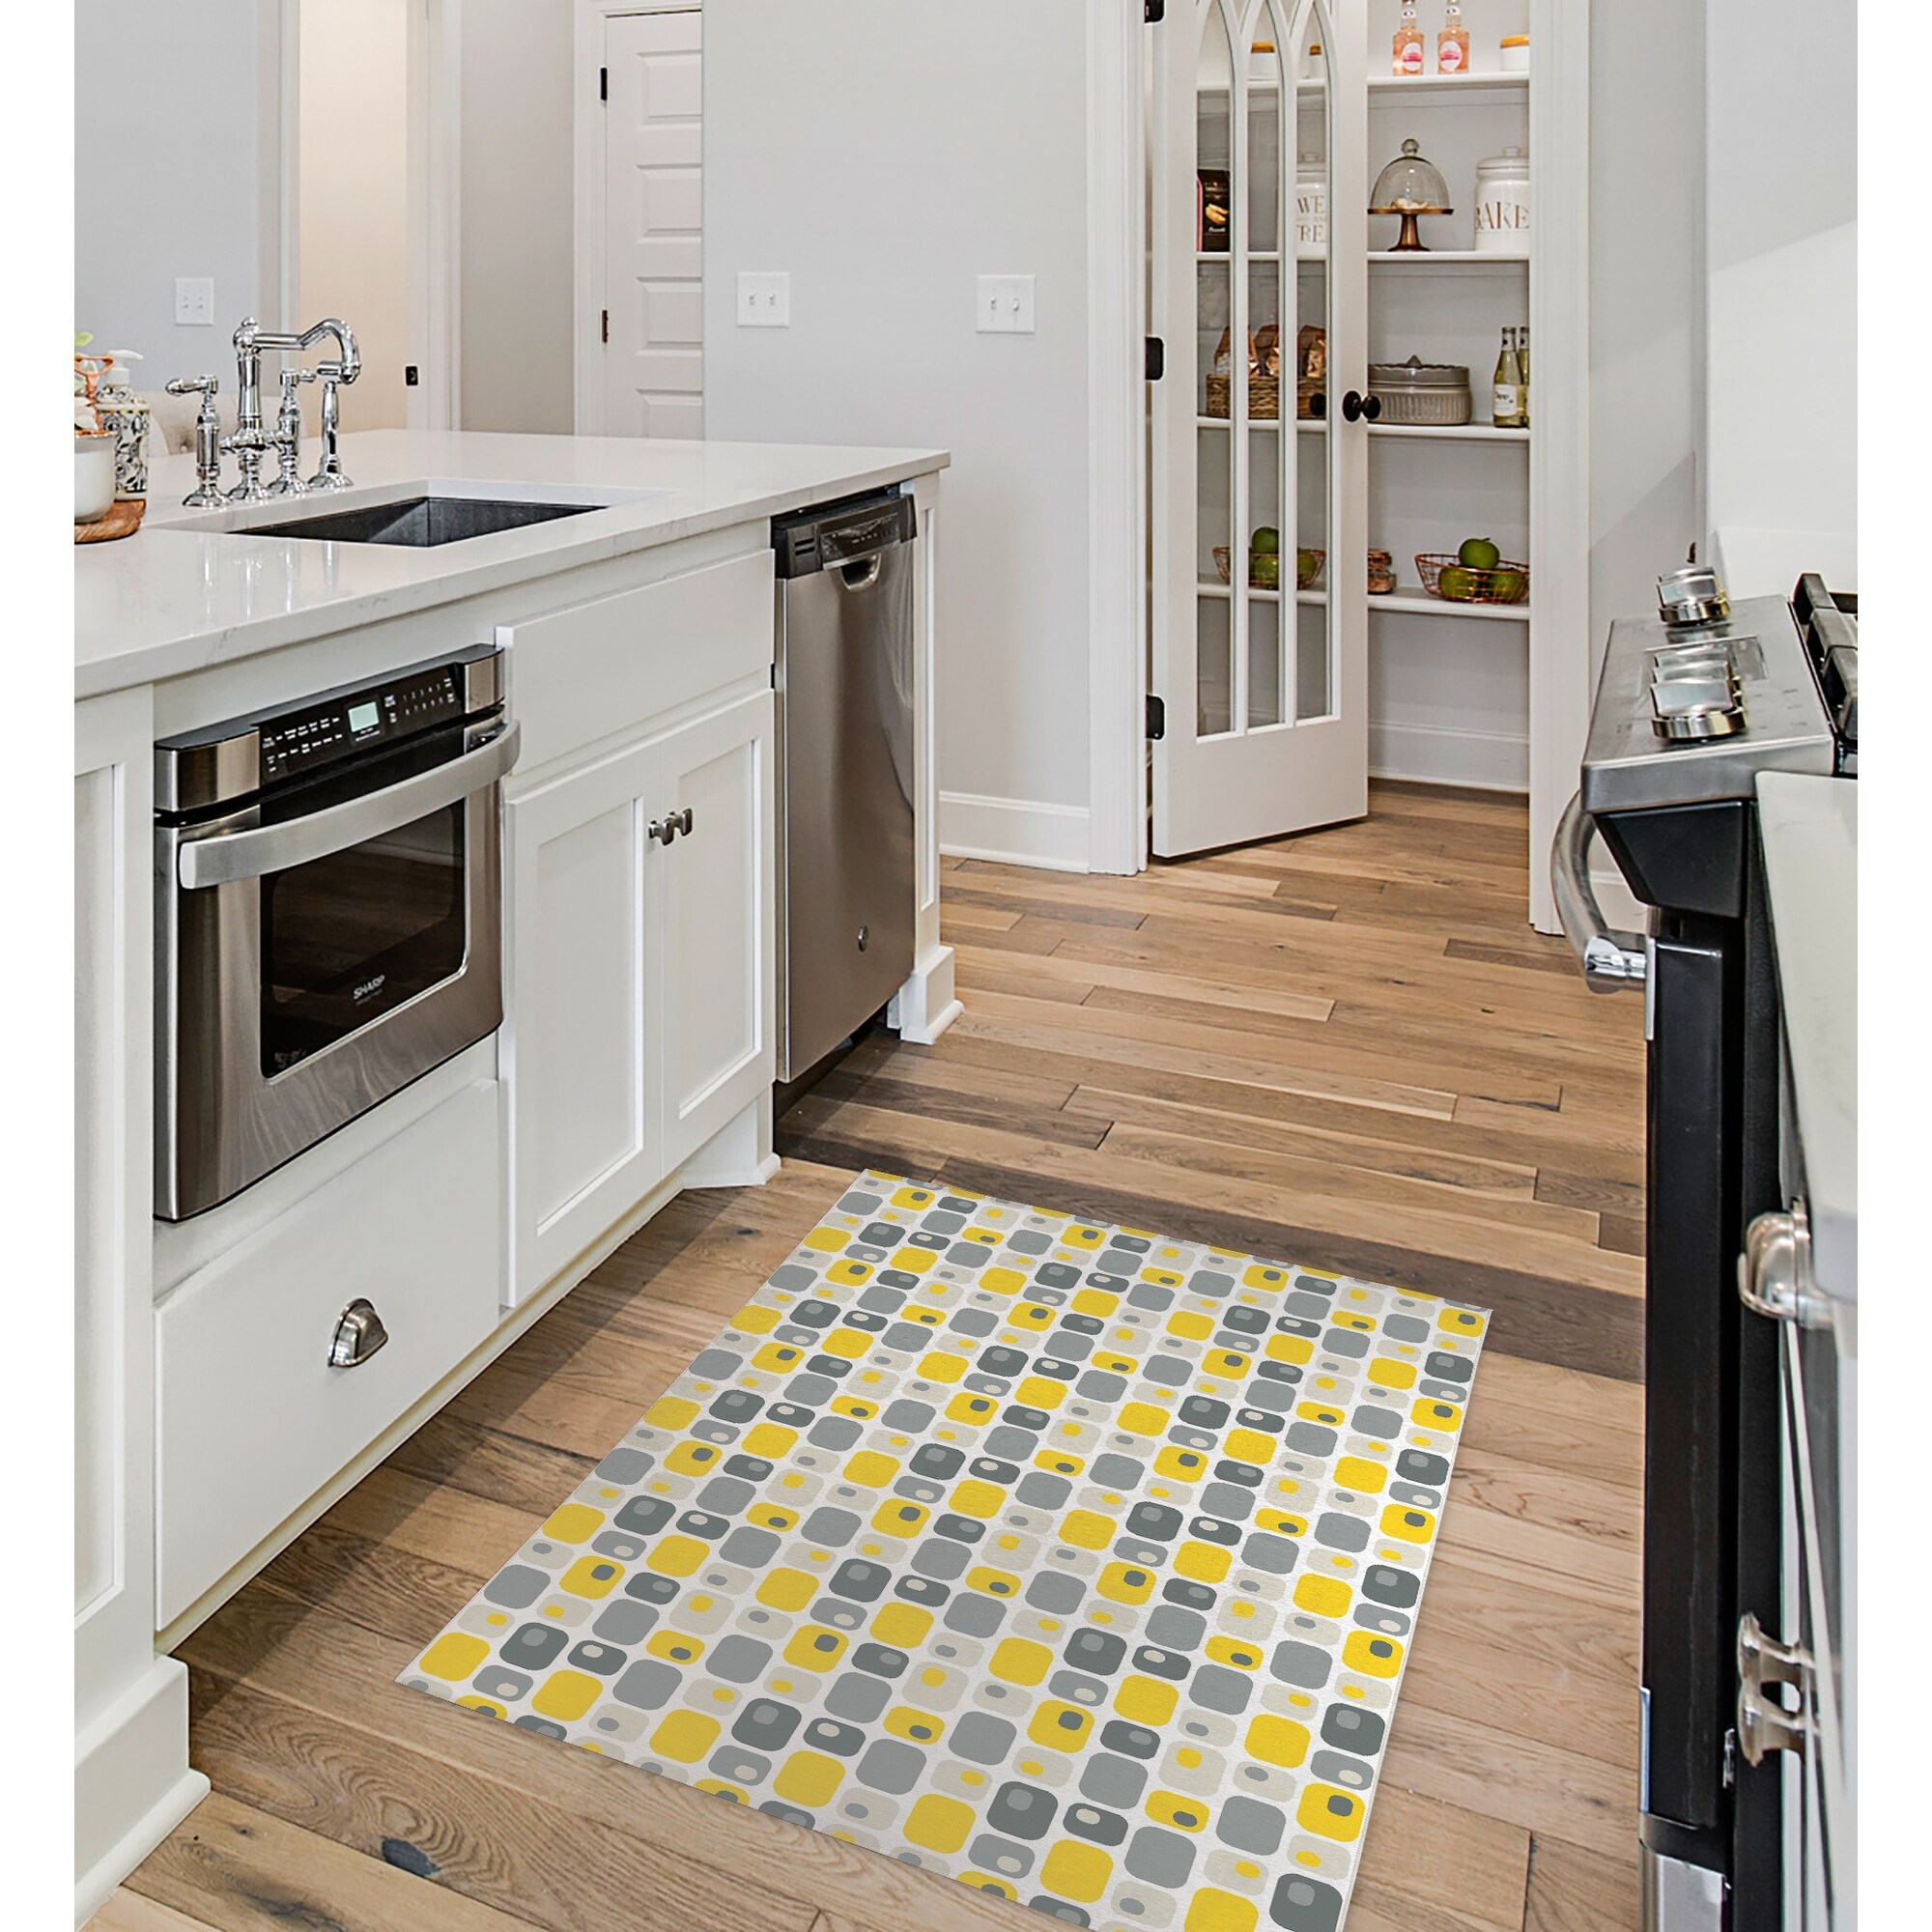 https://ak1.ostkcdn.com/images/products/is/images/direct/020b2bc9508f440973fc3c73cb83ef11f41c784f/ROUNDED-RECTANGLES-YELLOW-Kitchen-Mat-By-Becky-Bailey.jpg